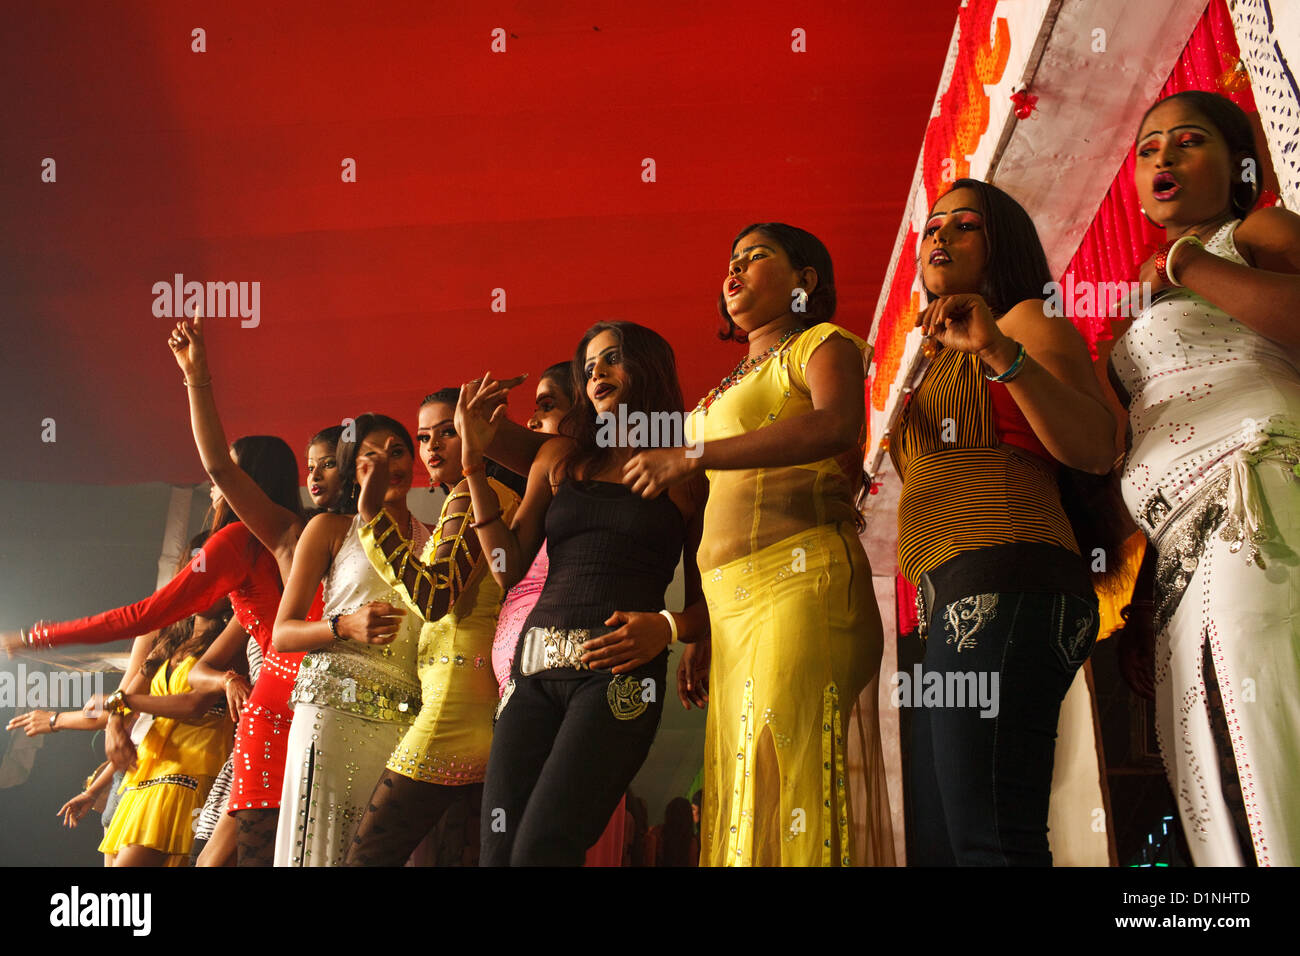 Women dancing on the stage in a theatre at night dance show at Sonepur Mela, Bihar, India Stock Photo